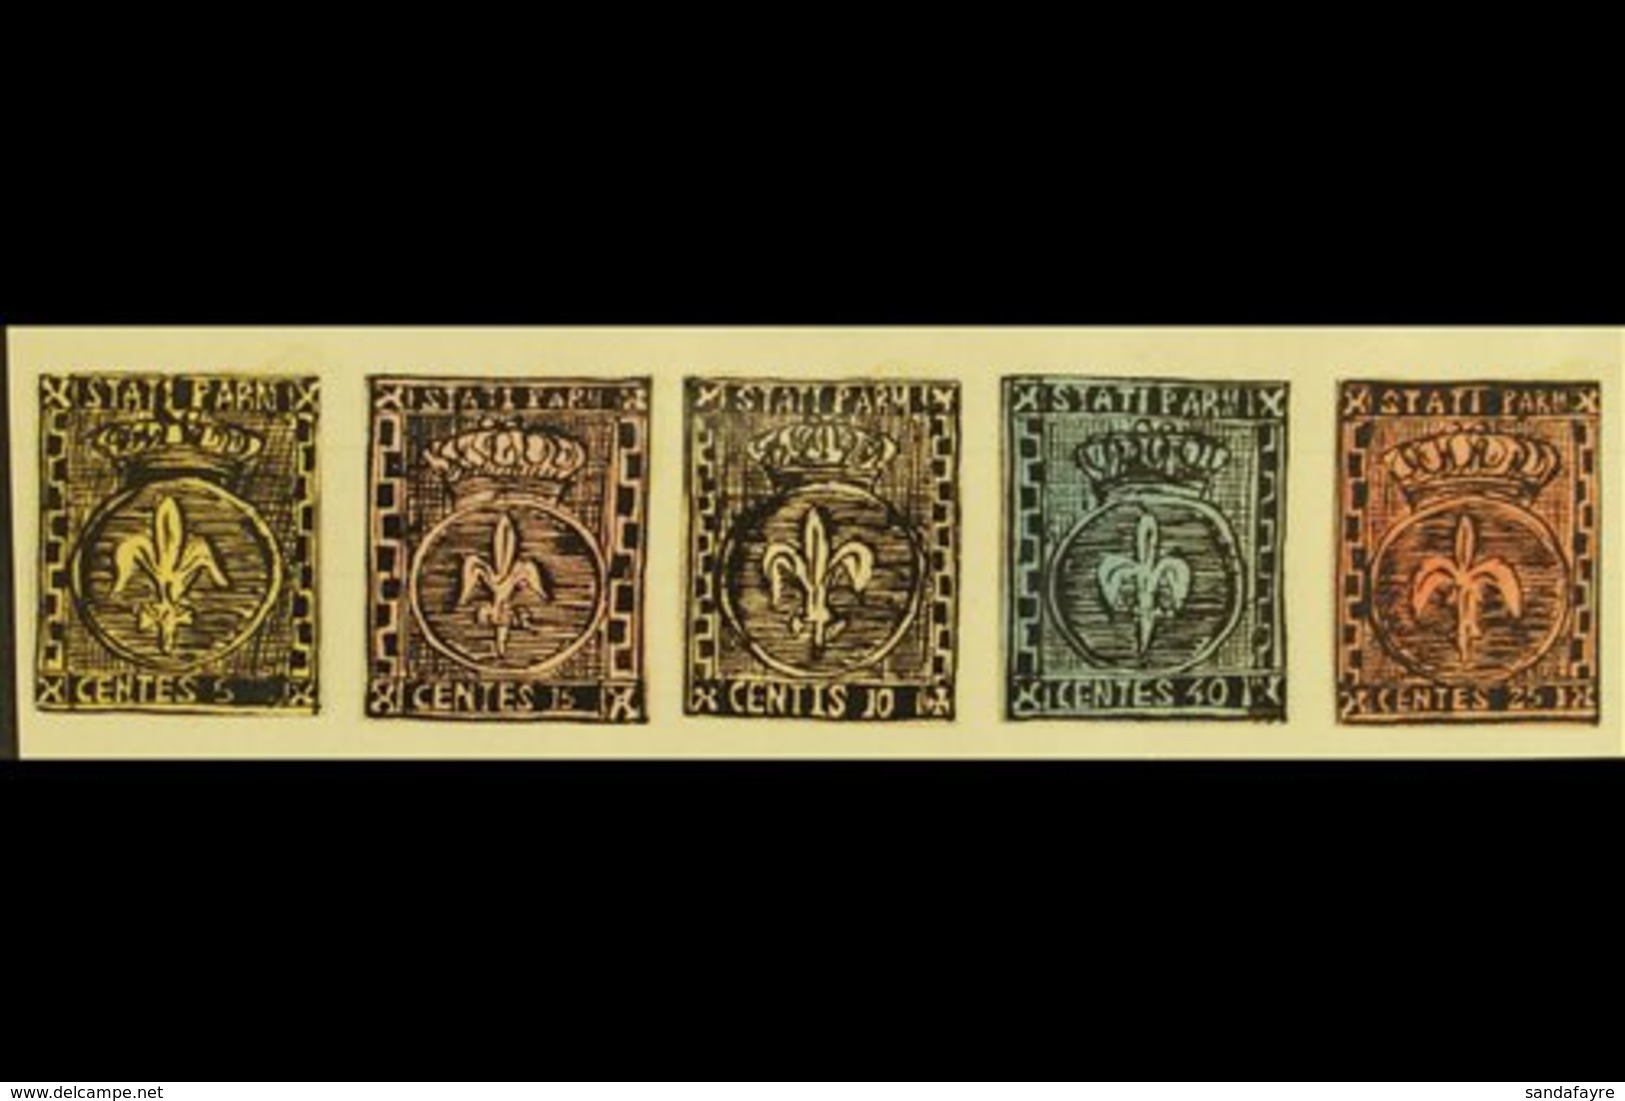 1861 HAND PAINTED STAMPS Unique Miniature Artworks Created By A French "Timbrophile" In 1861. PARMA Five Values, Similar - Unclassified